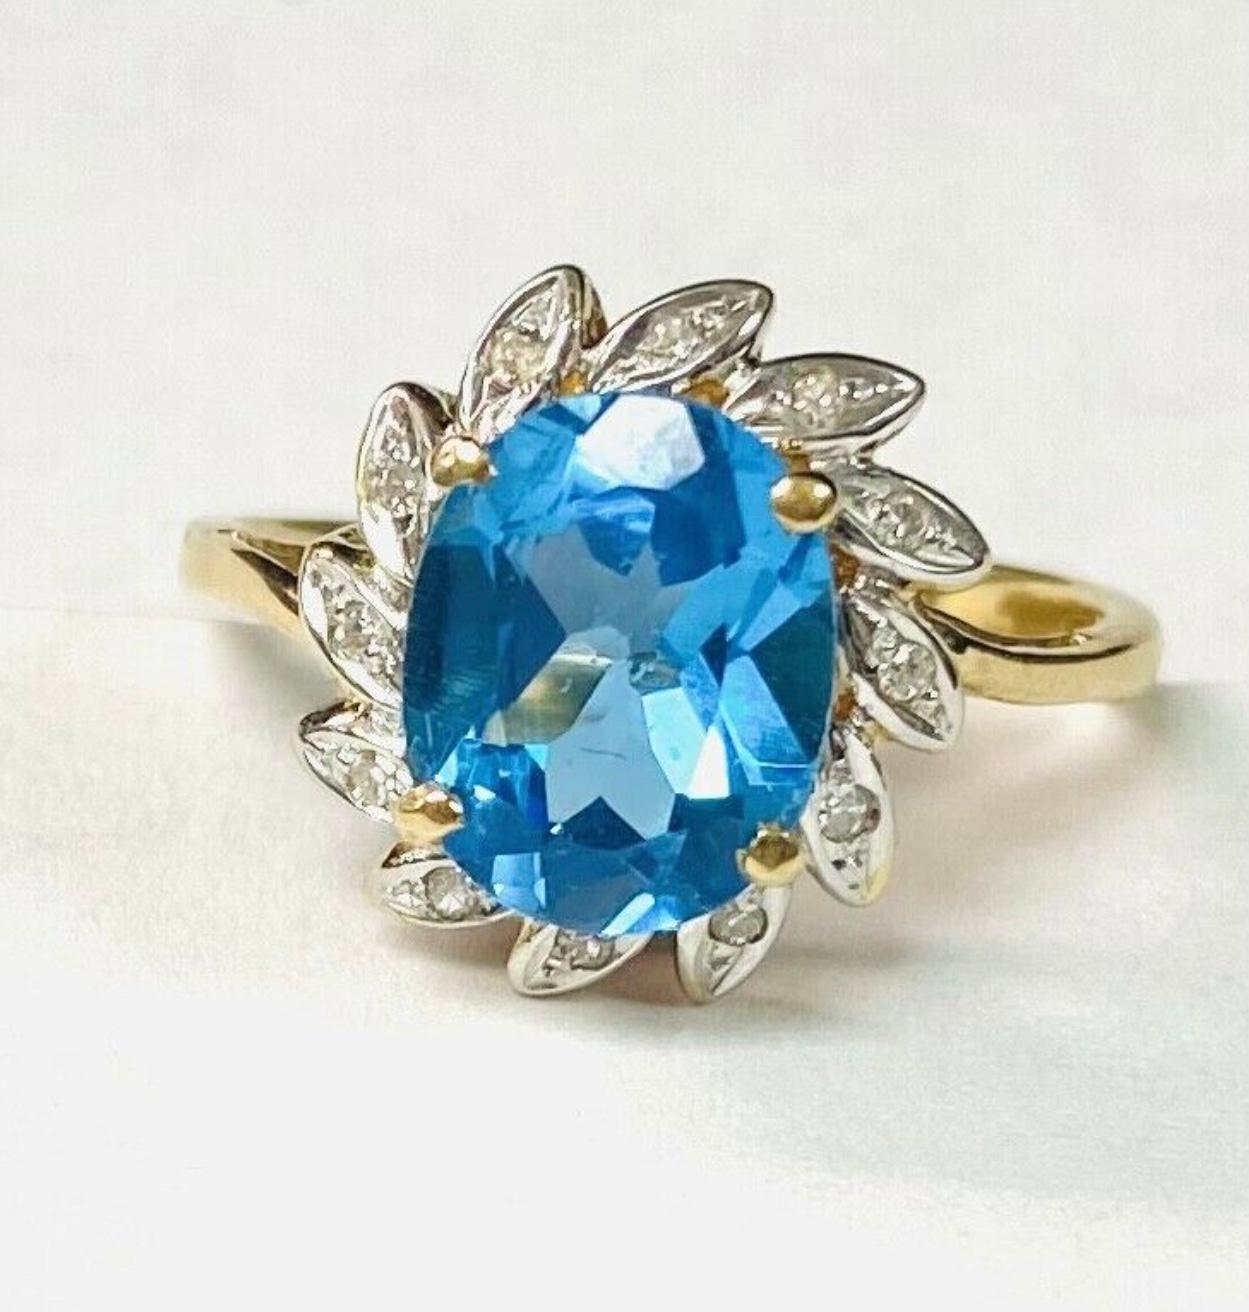 14k yellow gold blue topaz and diamond ring. The dimensions of the oval aquamarine are approximately 11.5 mm x 7.5mm. Approximately 3 carats. Marked 14k. Approximate size 7.5.